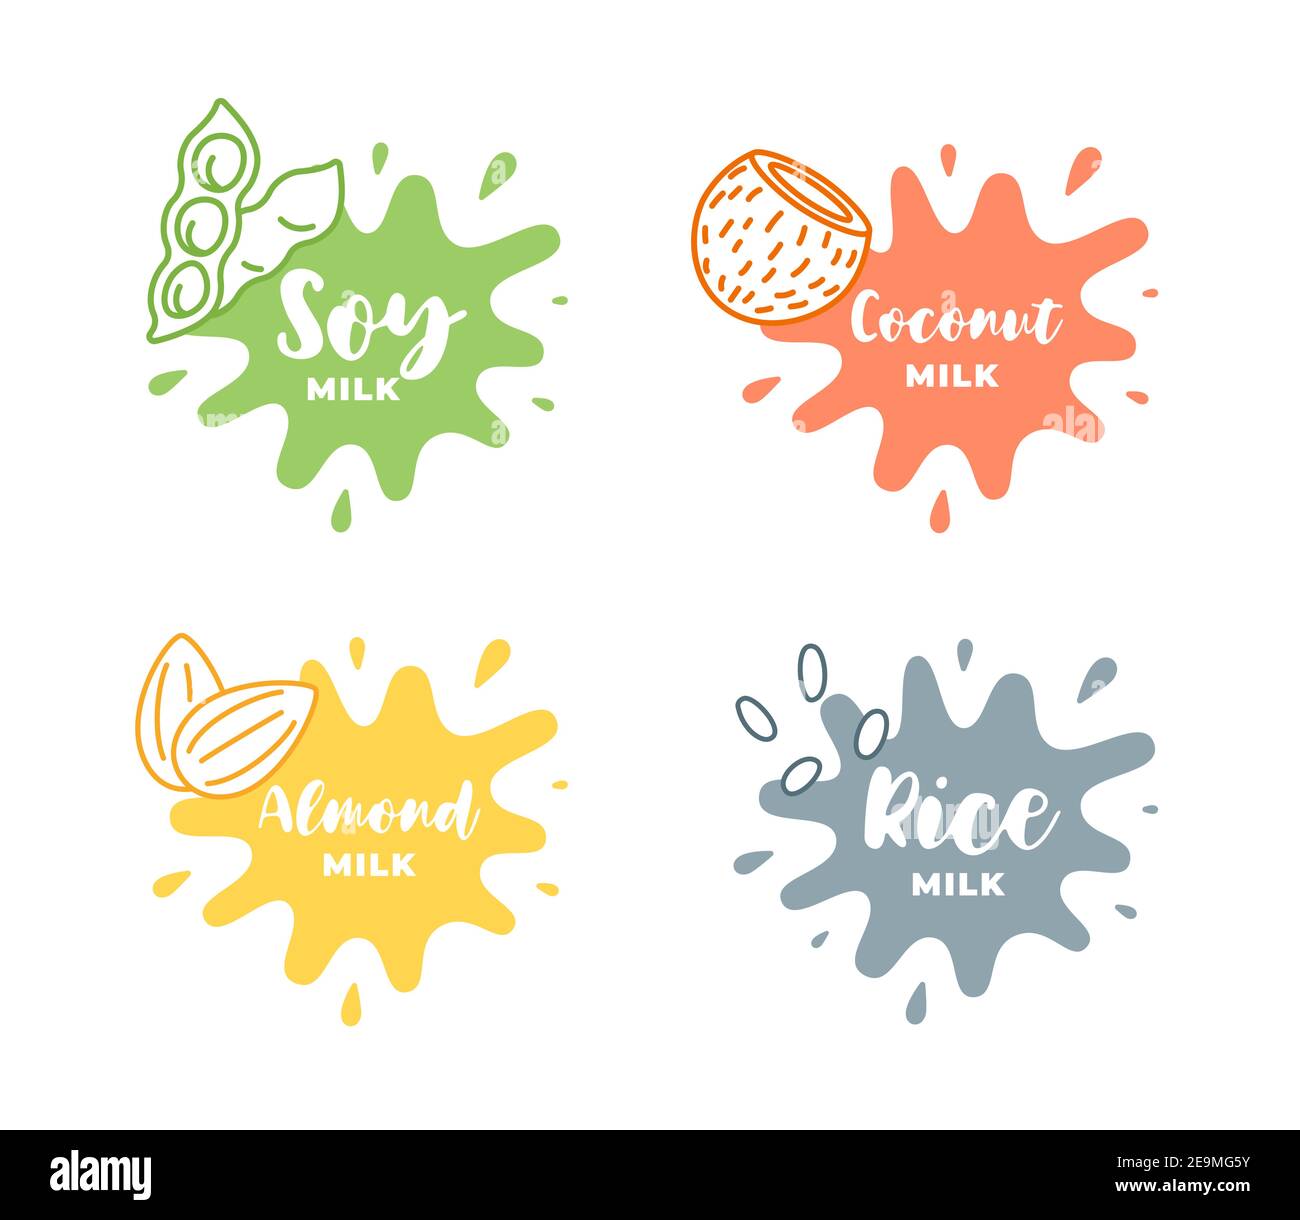 Soy, almond, coconut and rice milk logotype set in splash form with drops. Packaging badge design element set. Hand drawn healthy vegan drinks labels. Isolated logo collection vector eps illustration Stock Vector